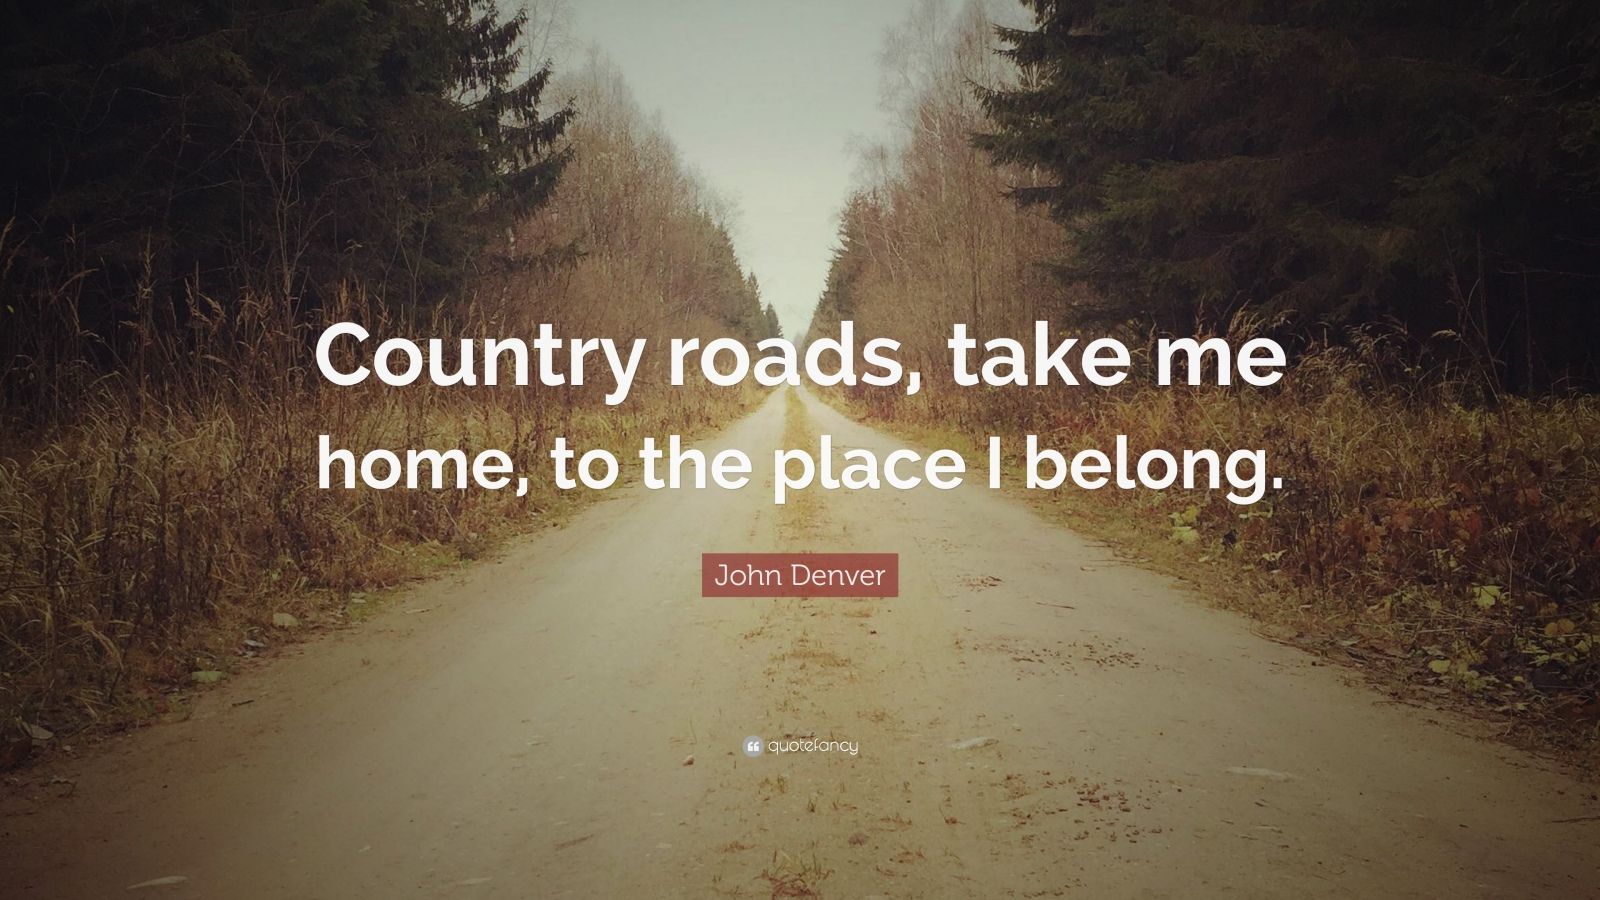 John Denver Quote: “Country roads, take me home, to the place I belong